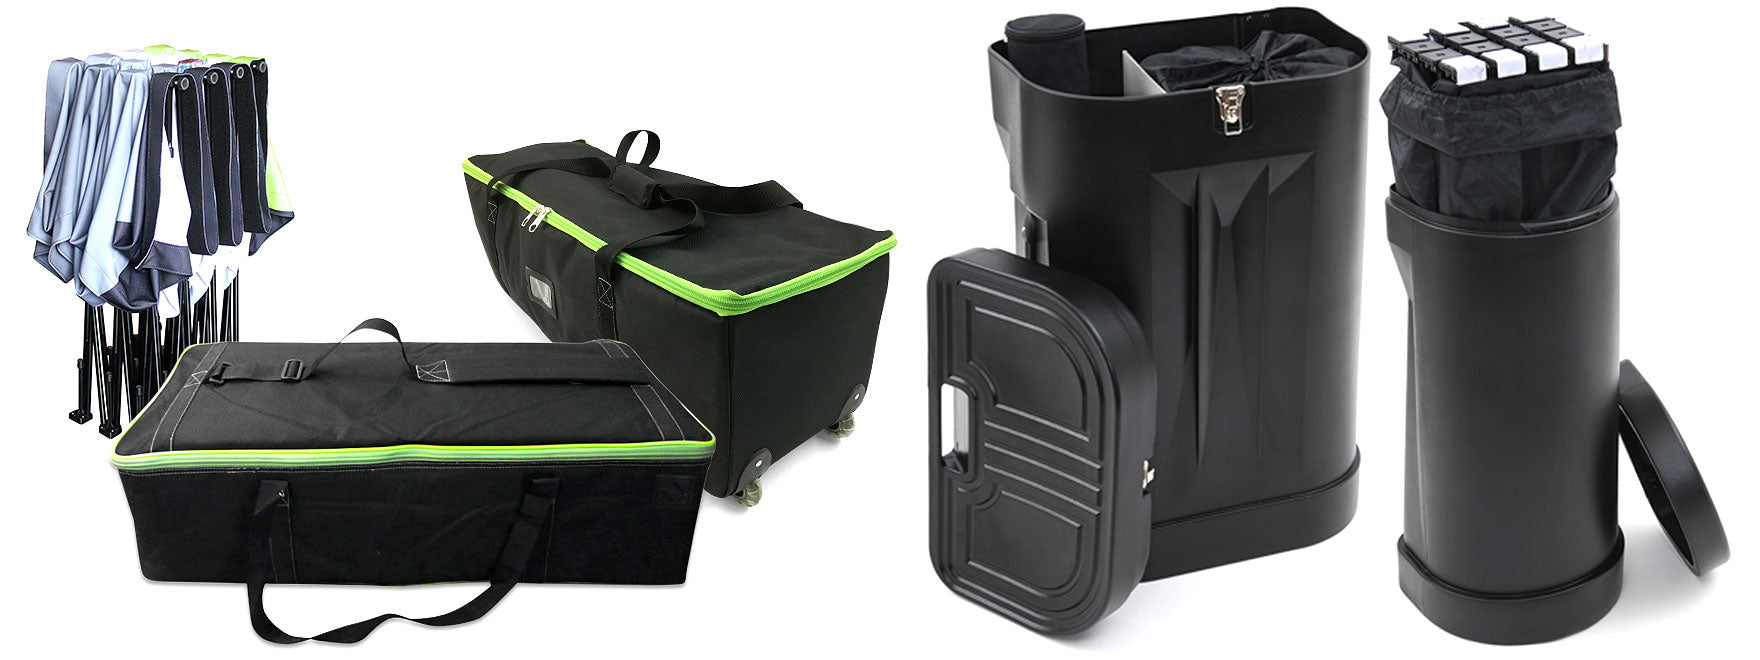 Xtension Squared Pop-Up Transport Solutions (Cases & Bags)